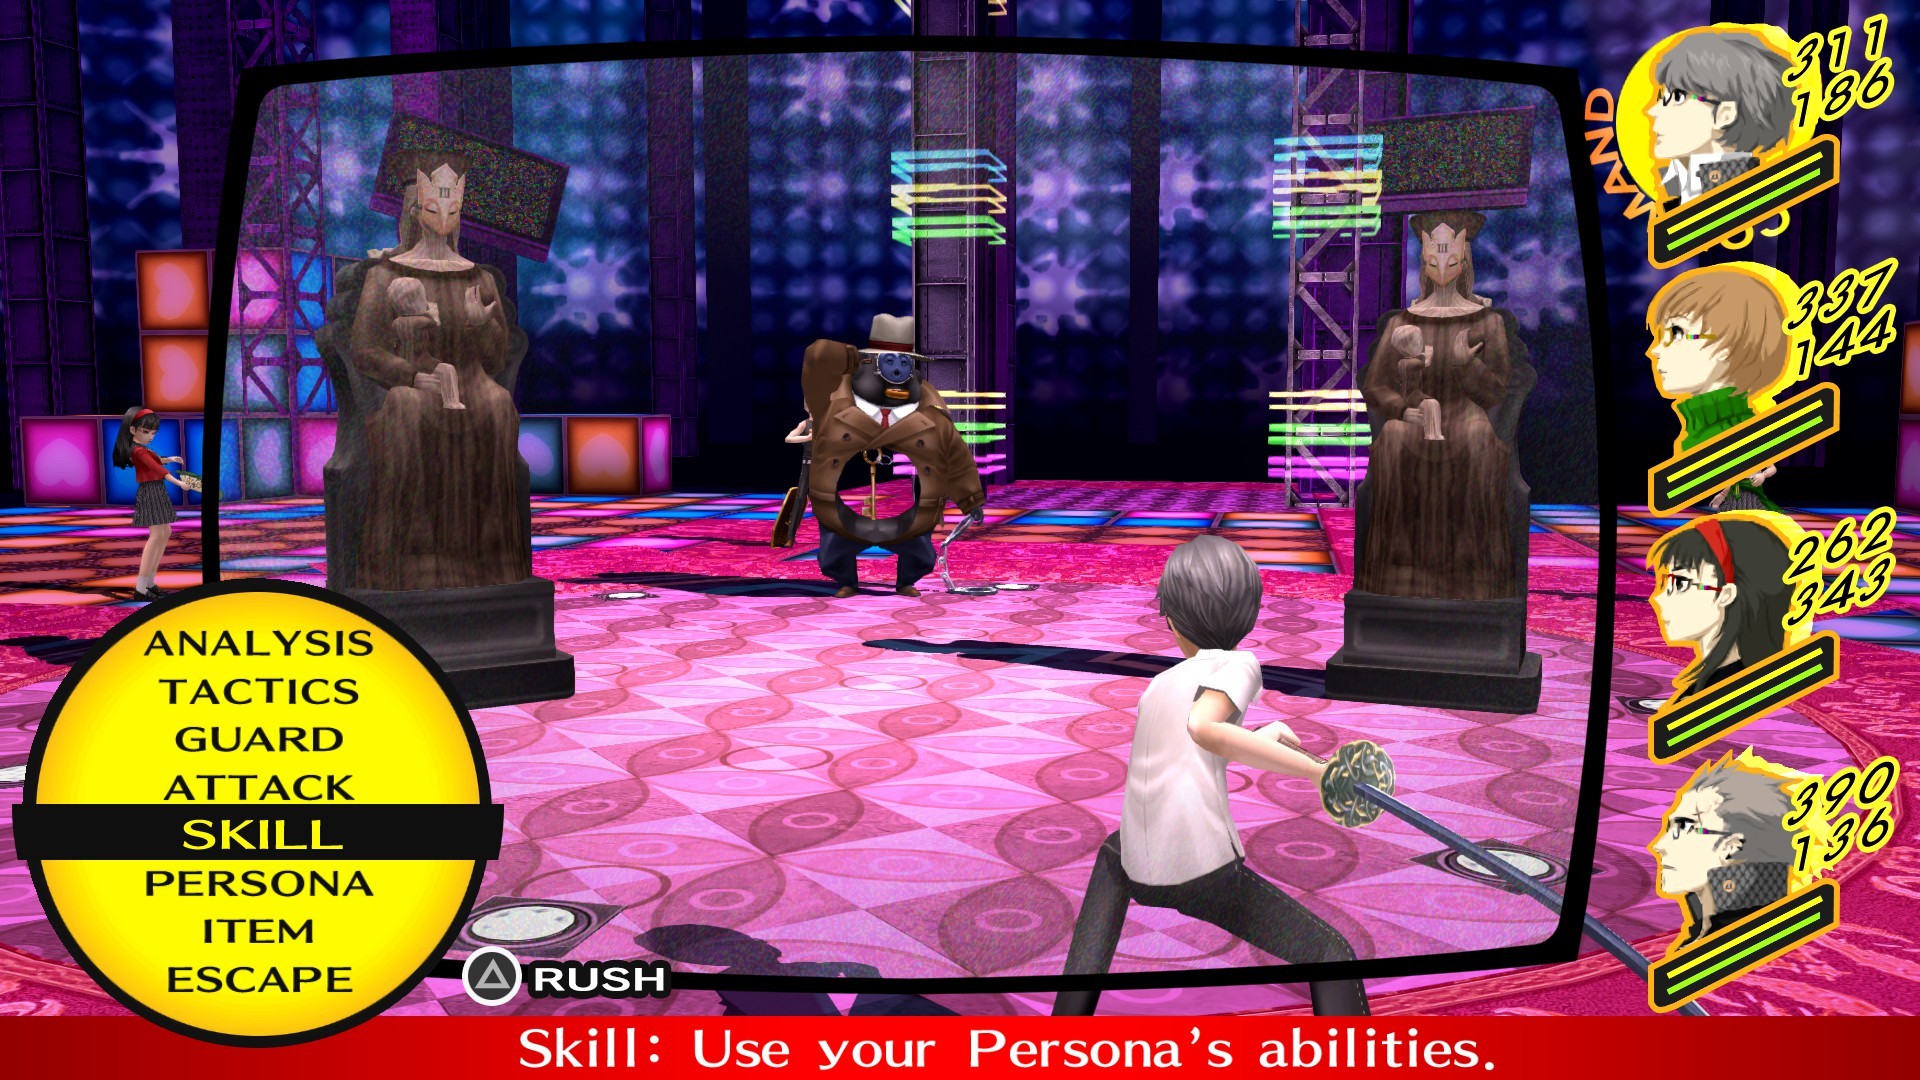 Persona 4 on PC